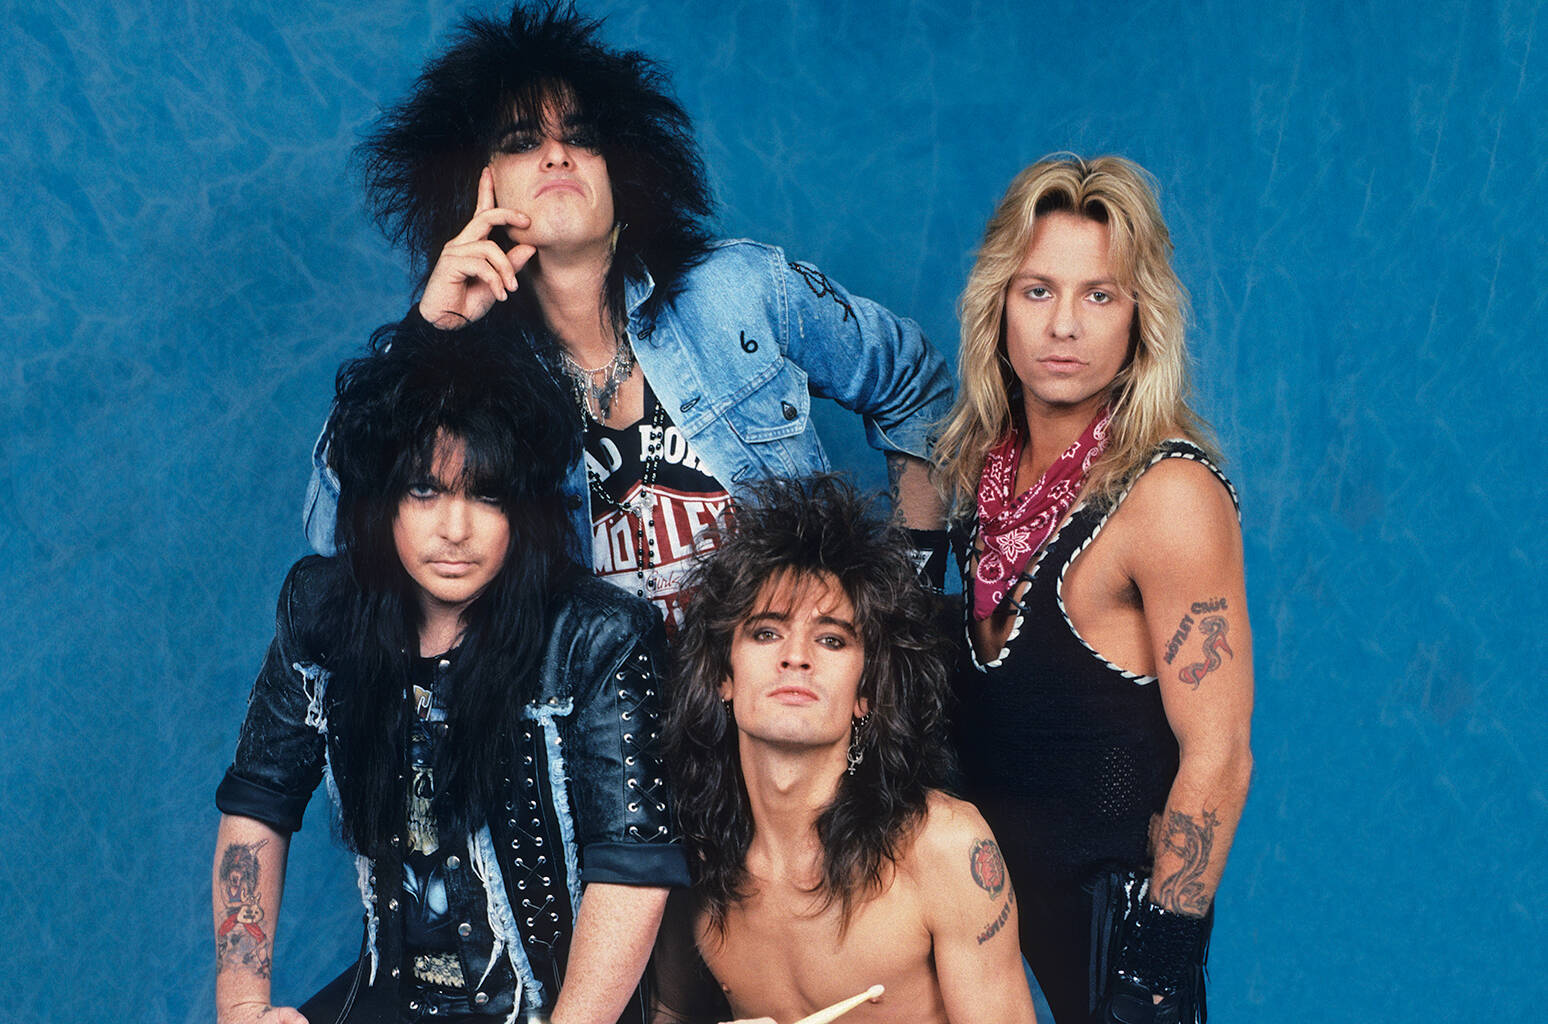 Who Is The Lead Singer For Mötley Crüe